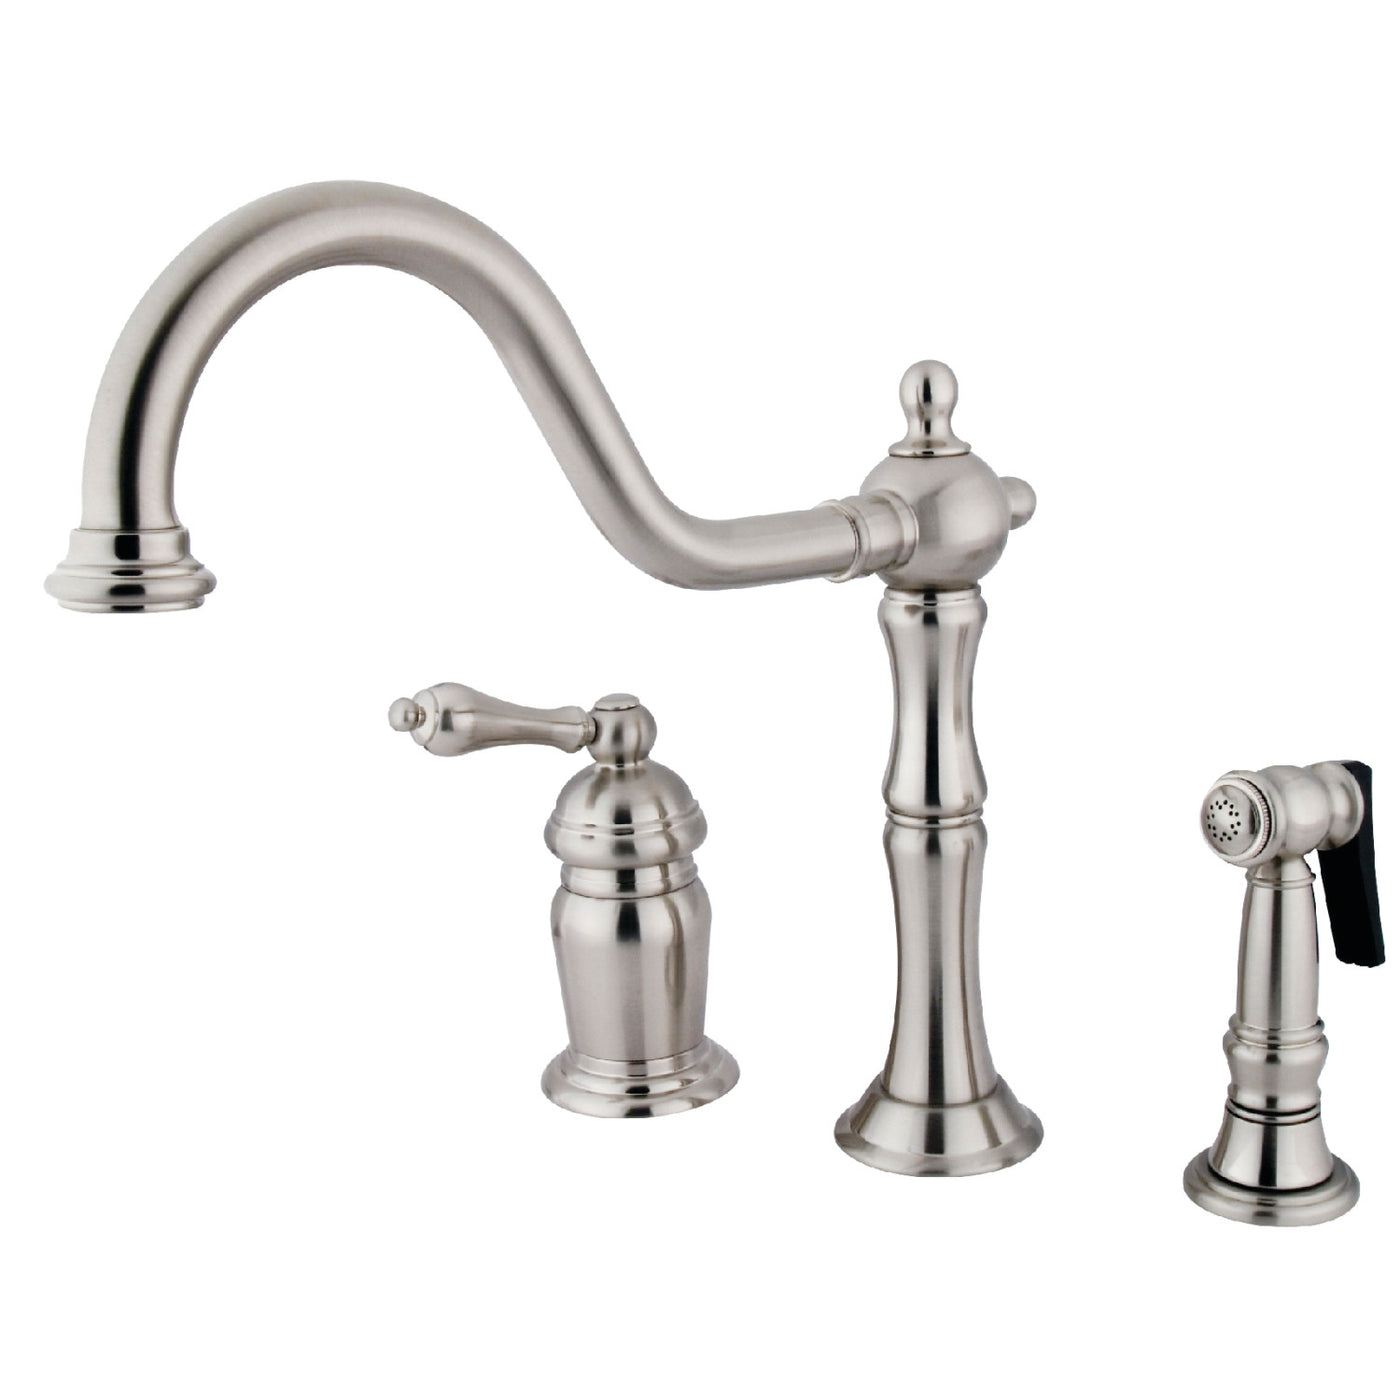 Elements of Design ES1818ALBS Single-Handle Widespread Kitchen Faucet with Brass Sprayer, Brushed Nickel